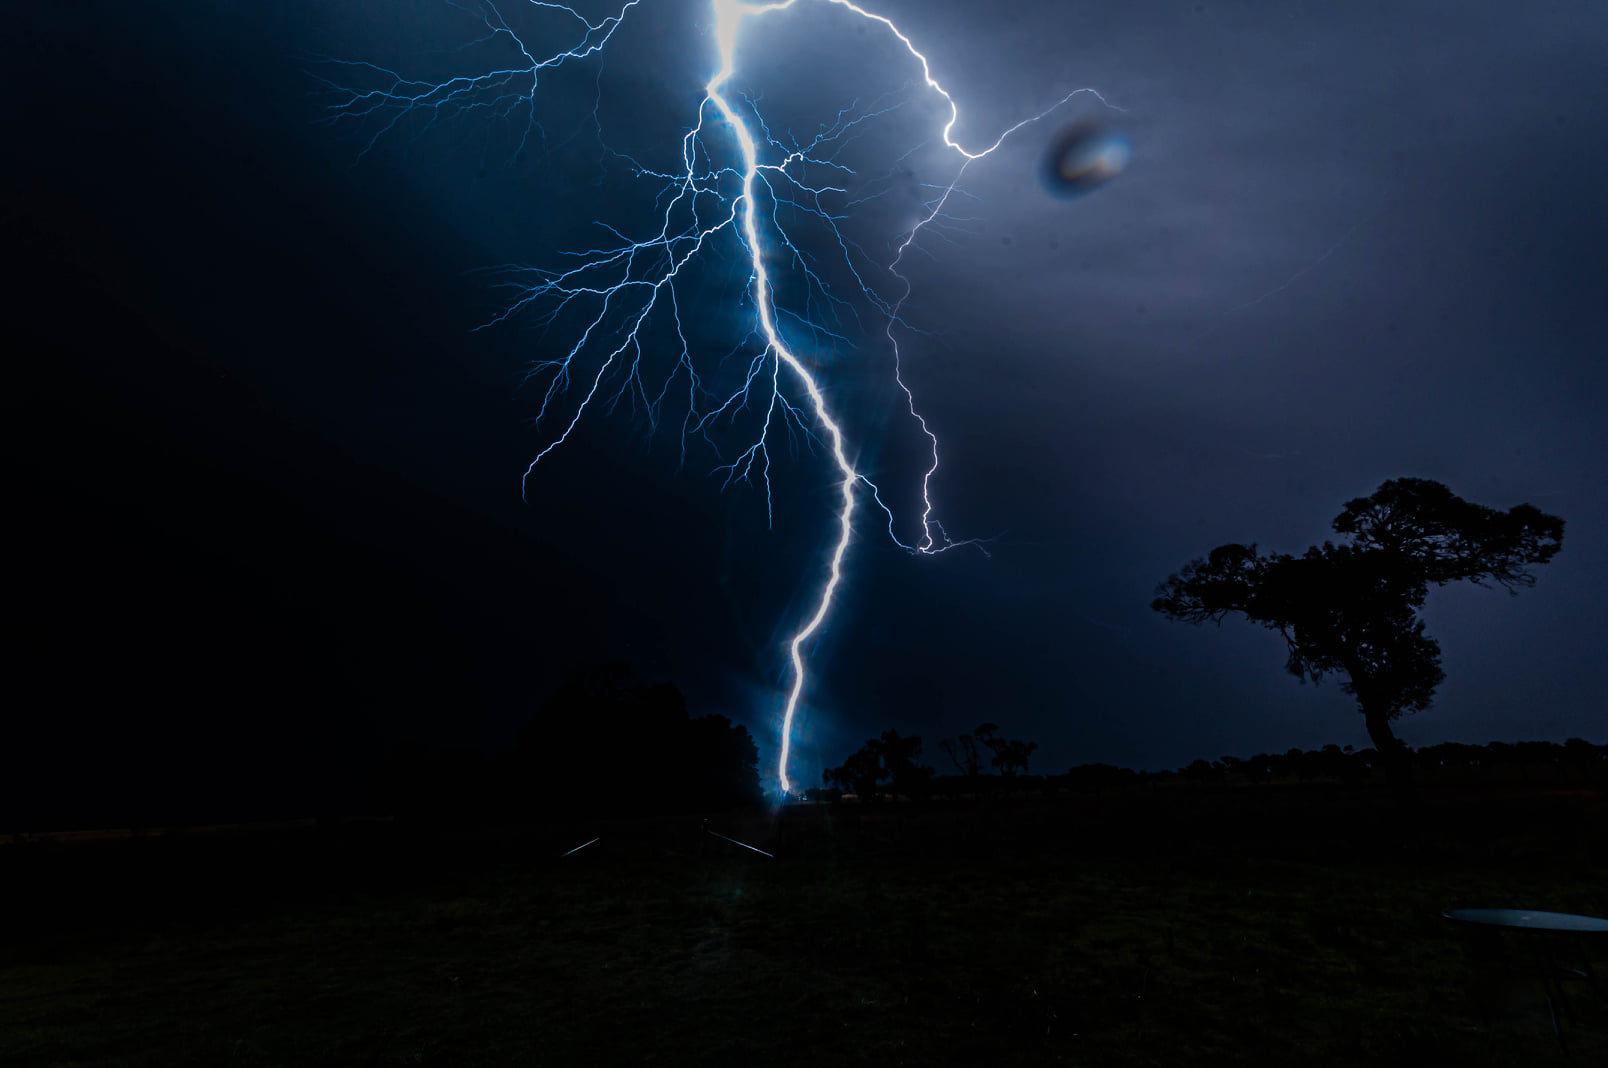 Our people capturing the world around us. An image of lightning in a summer storm.